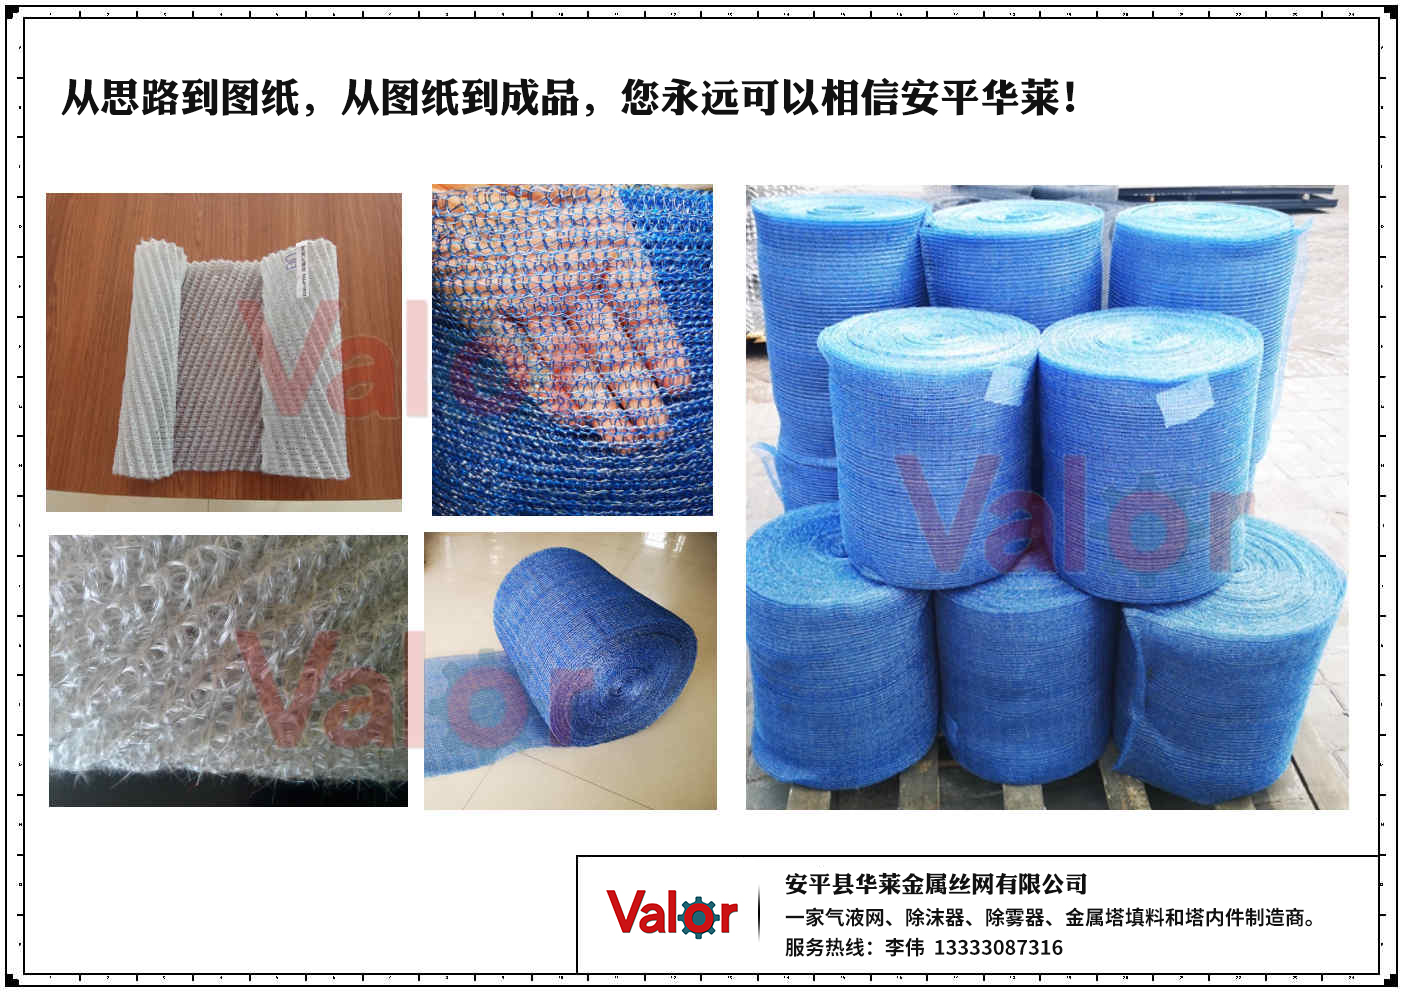 various kinds of co-knitted mesh